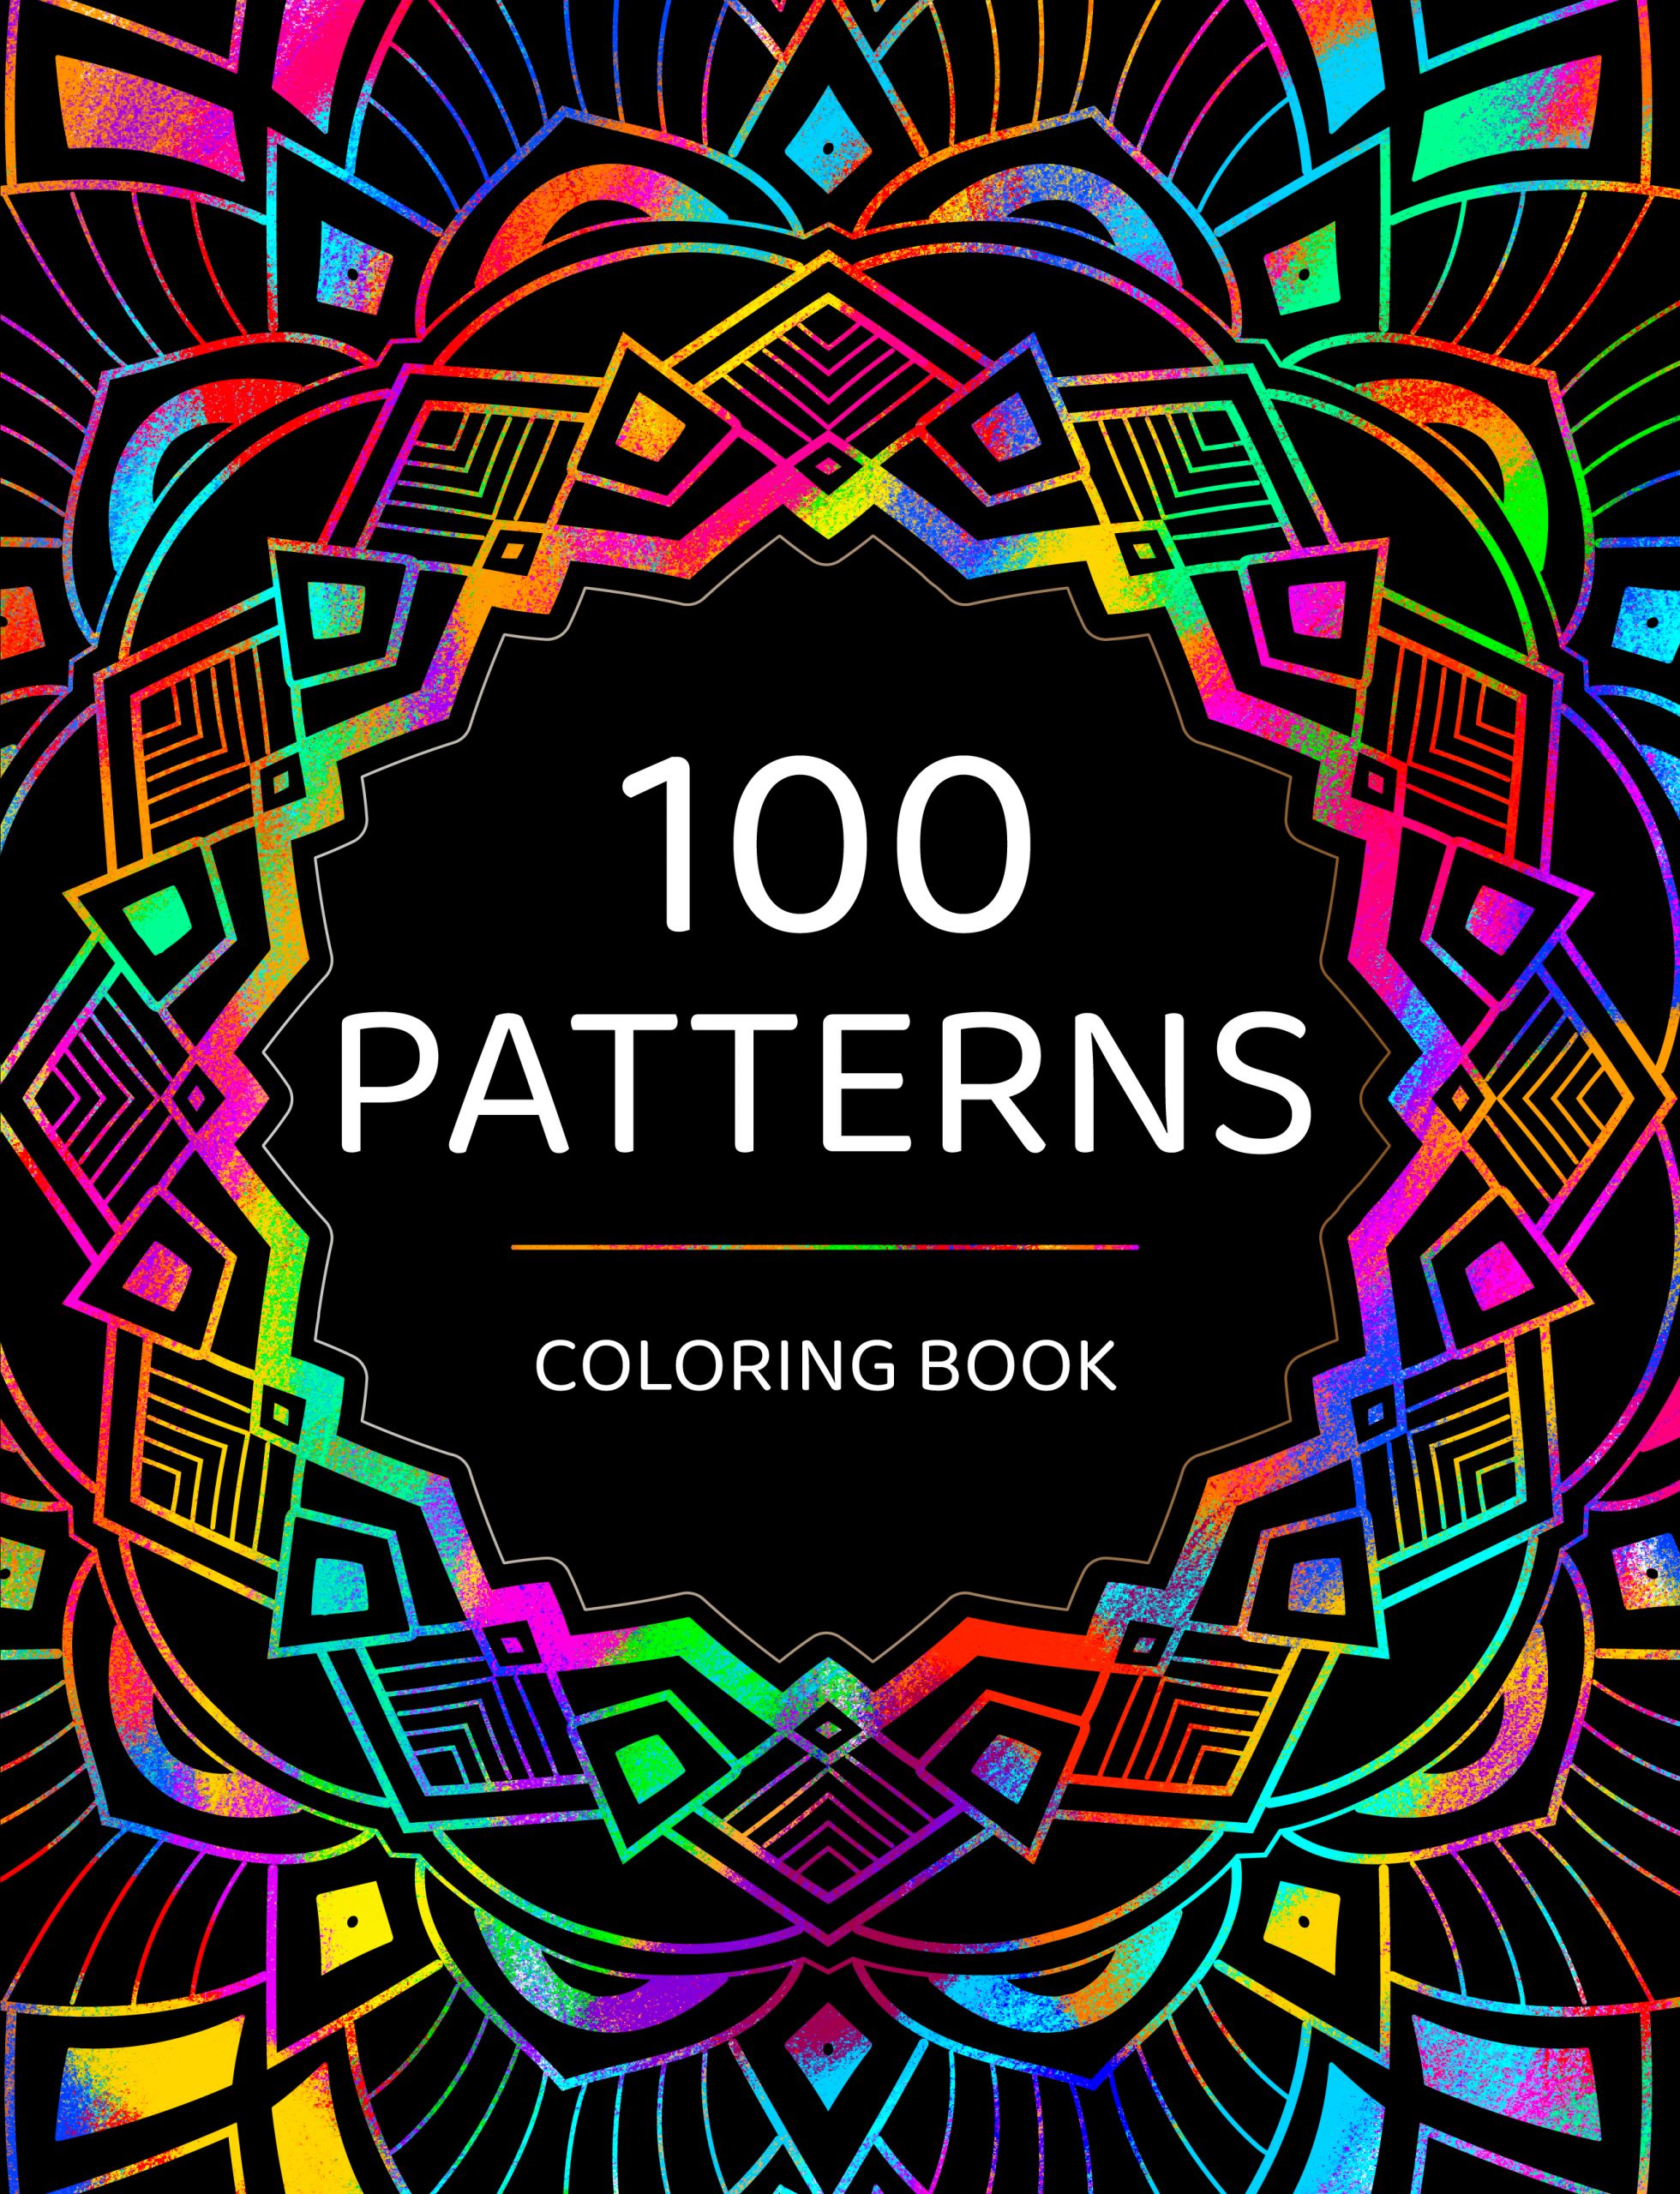 Pattern Coloring Book Artistic Stones Ethnic Stock Vector (Royalty Free)  302842184